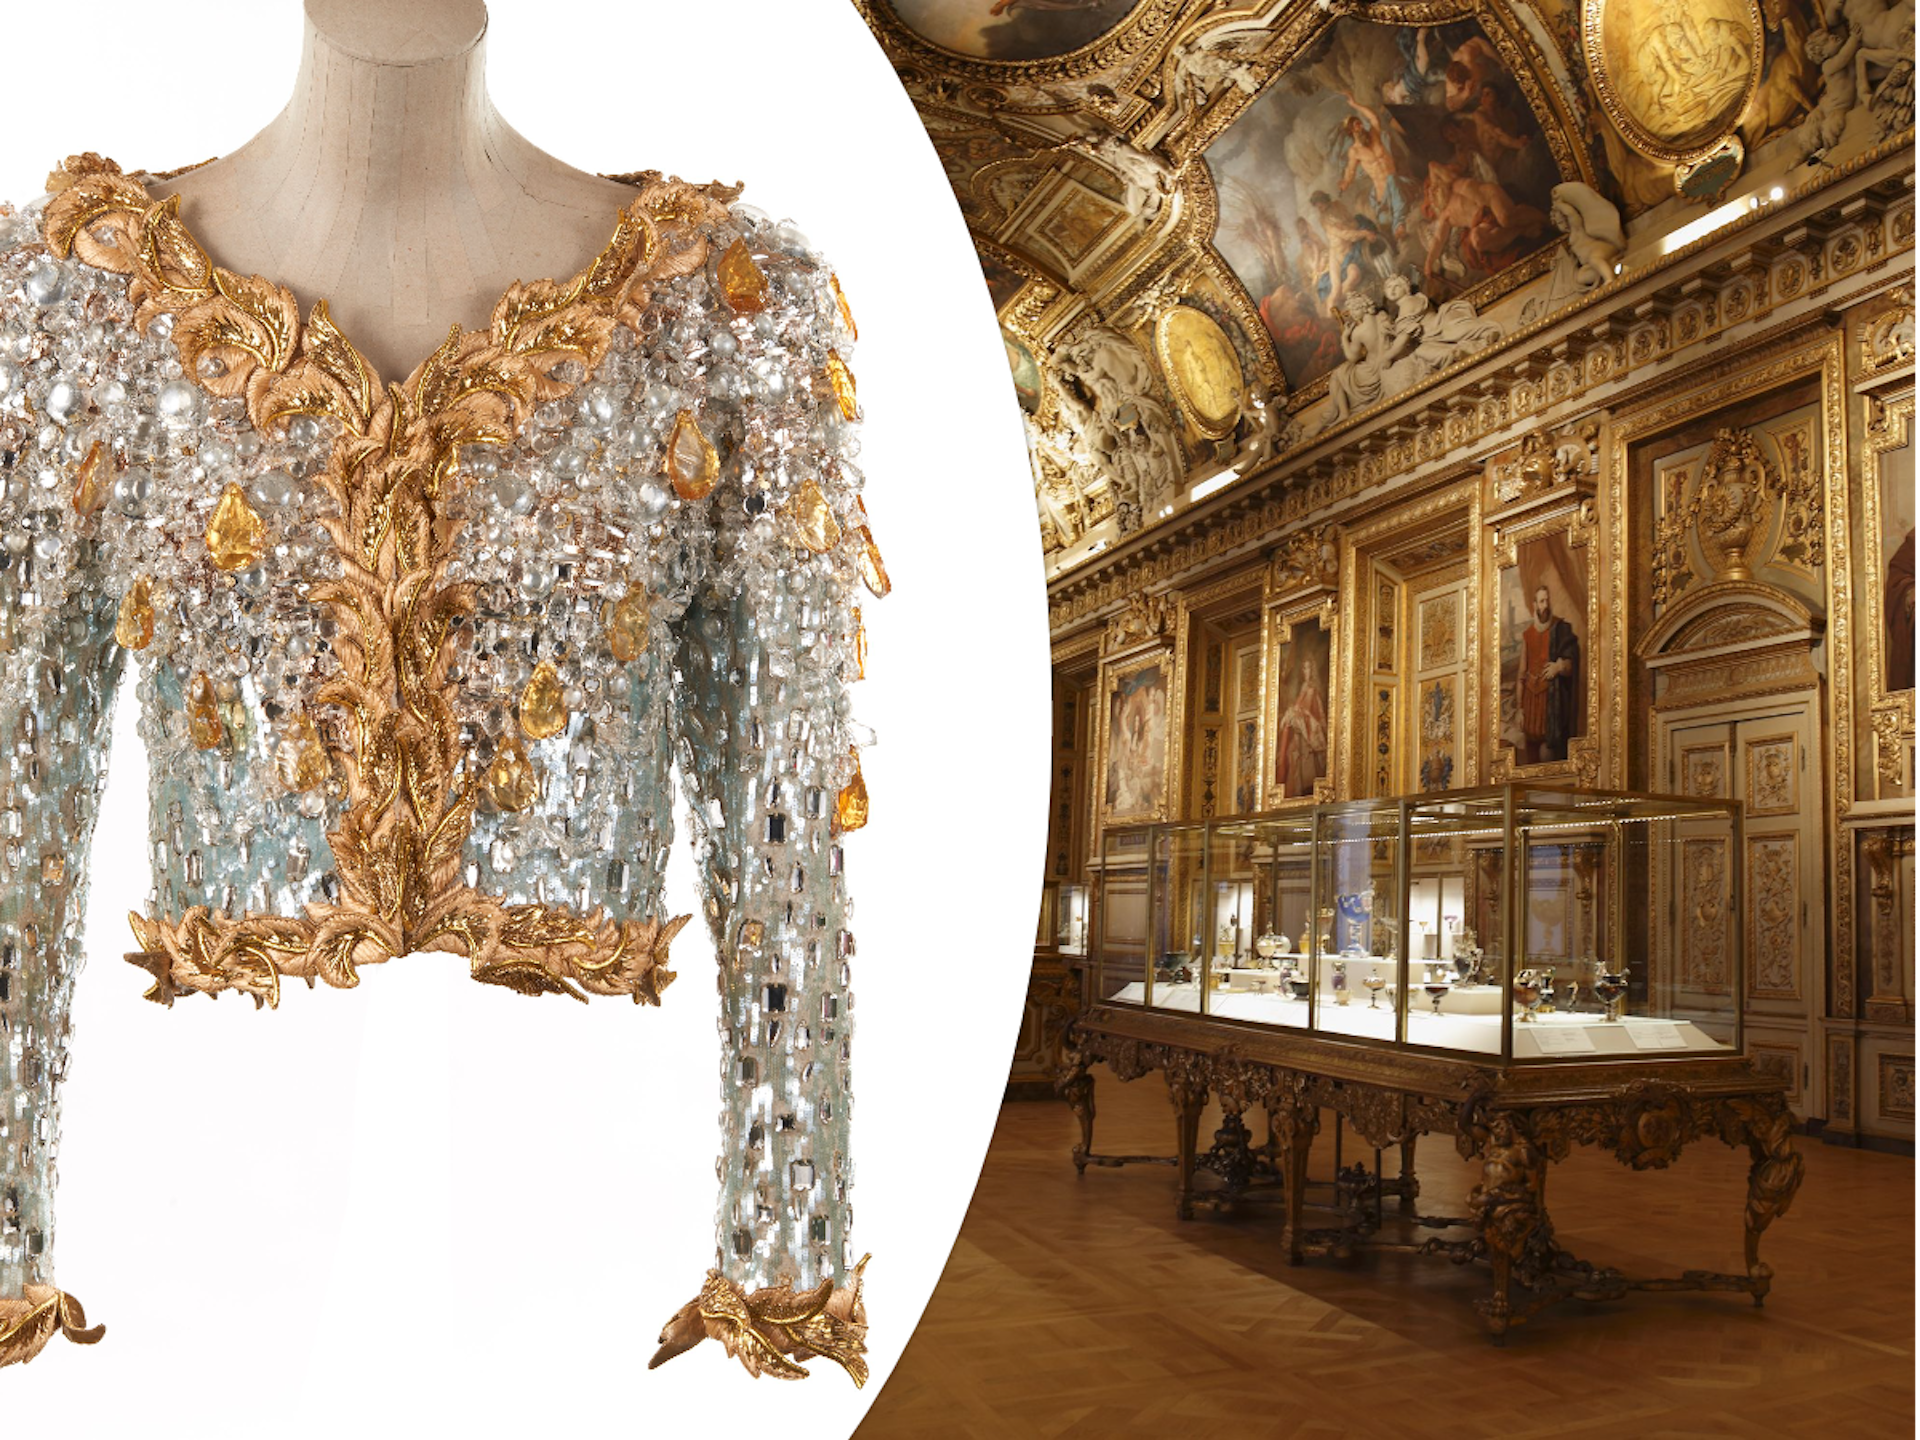 A silver emroidered YSL jacket alongside the art work of the Apollo Gallery in the Louvre